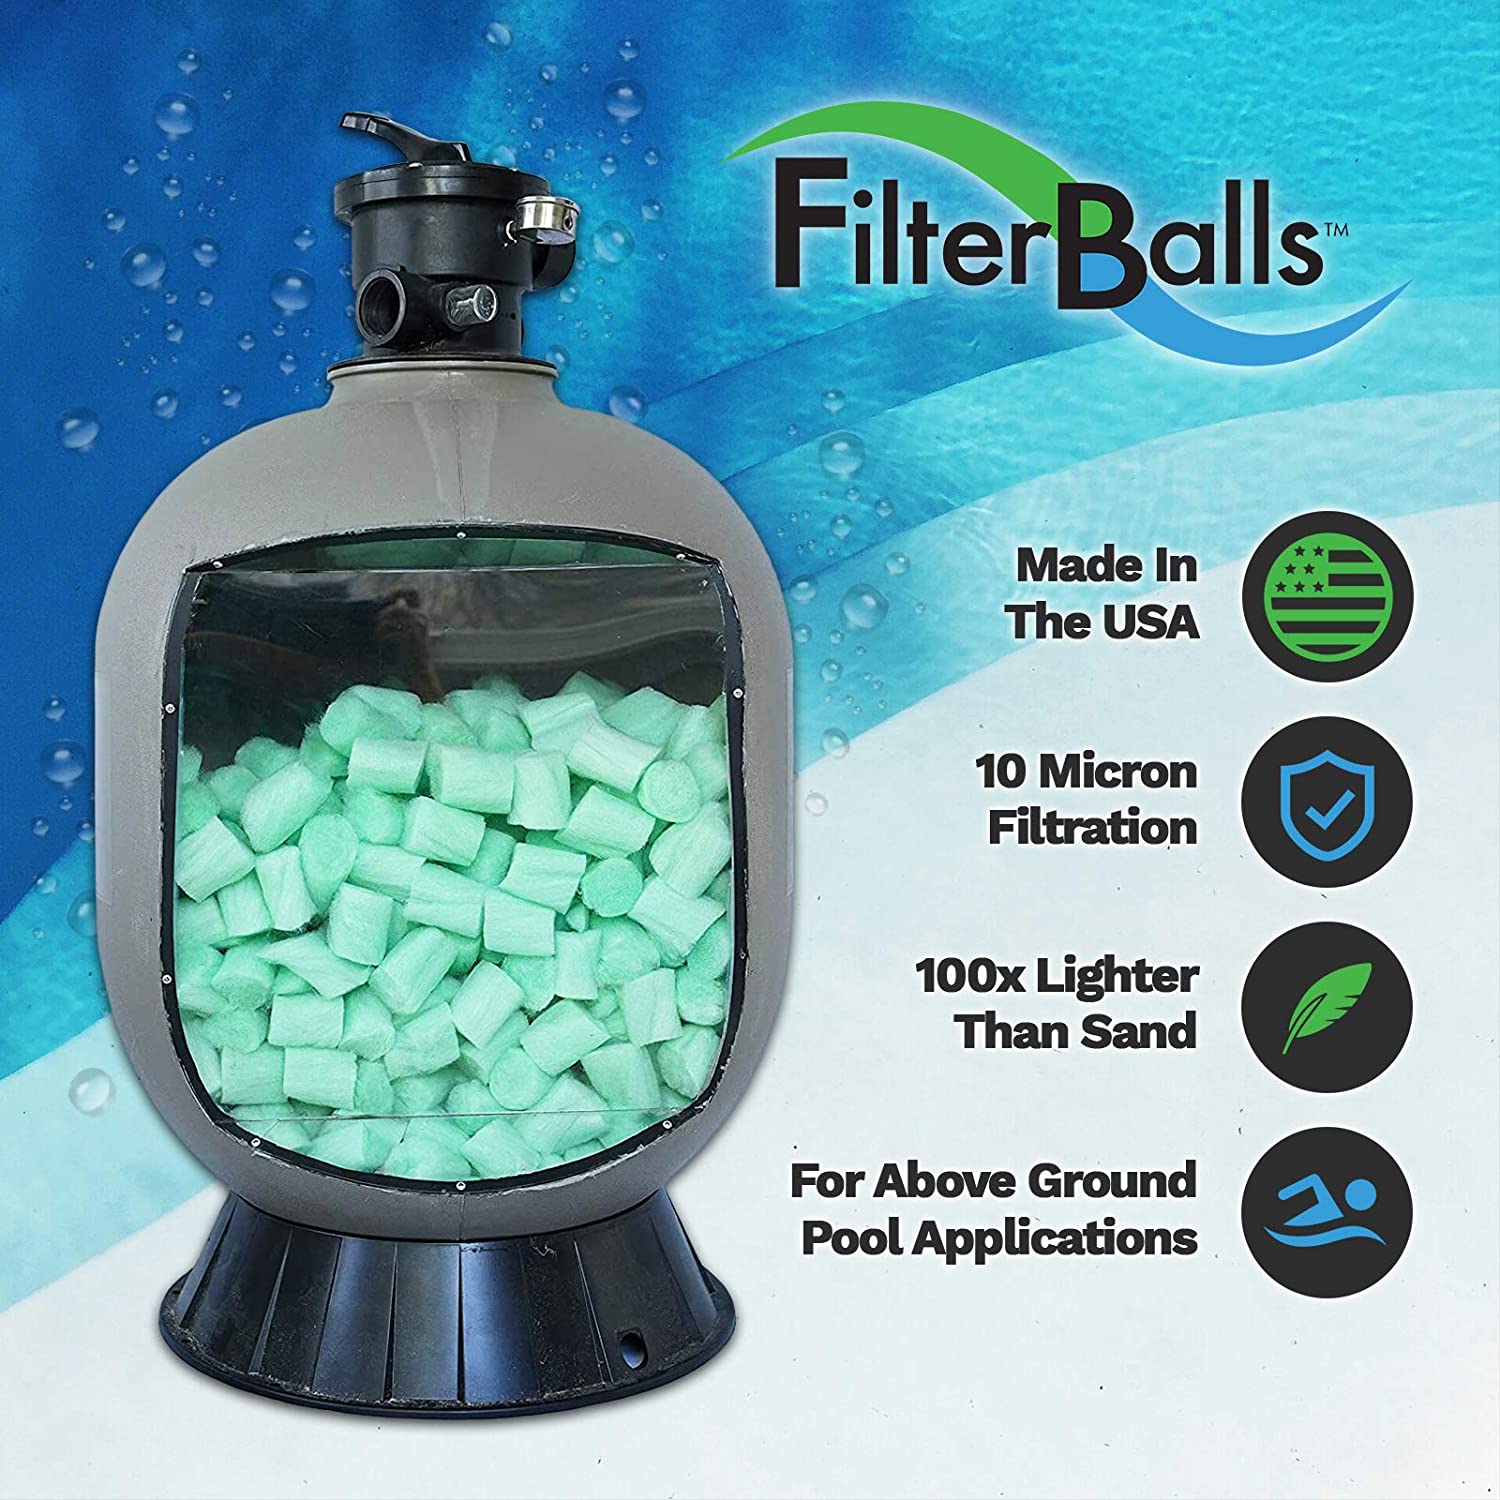 the FilterBalls at System Filter Pool Pool Balls department Filter Systems in Filter